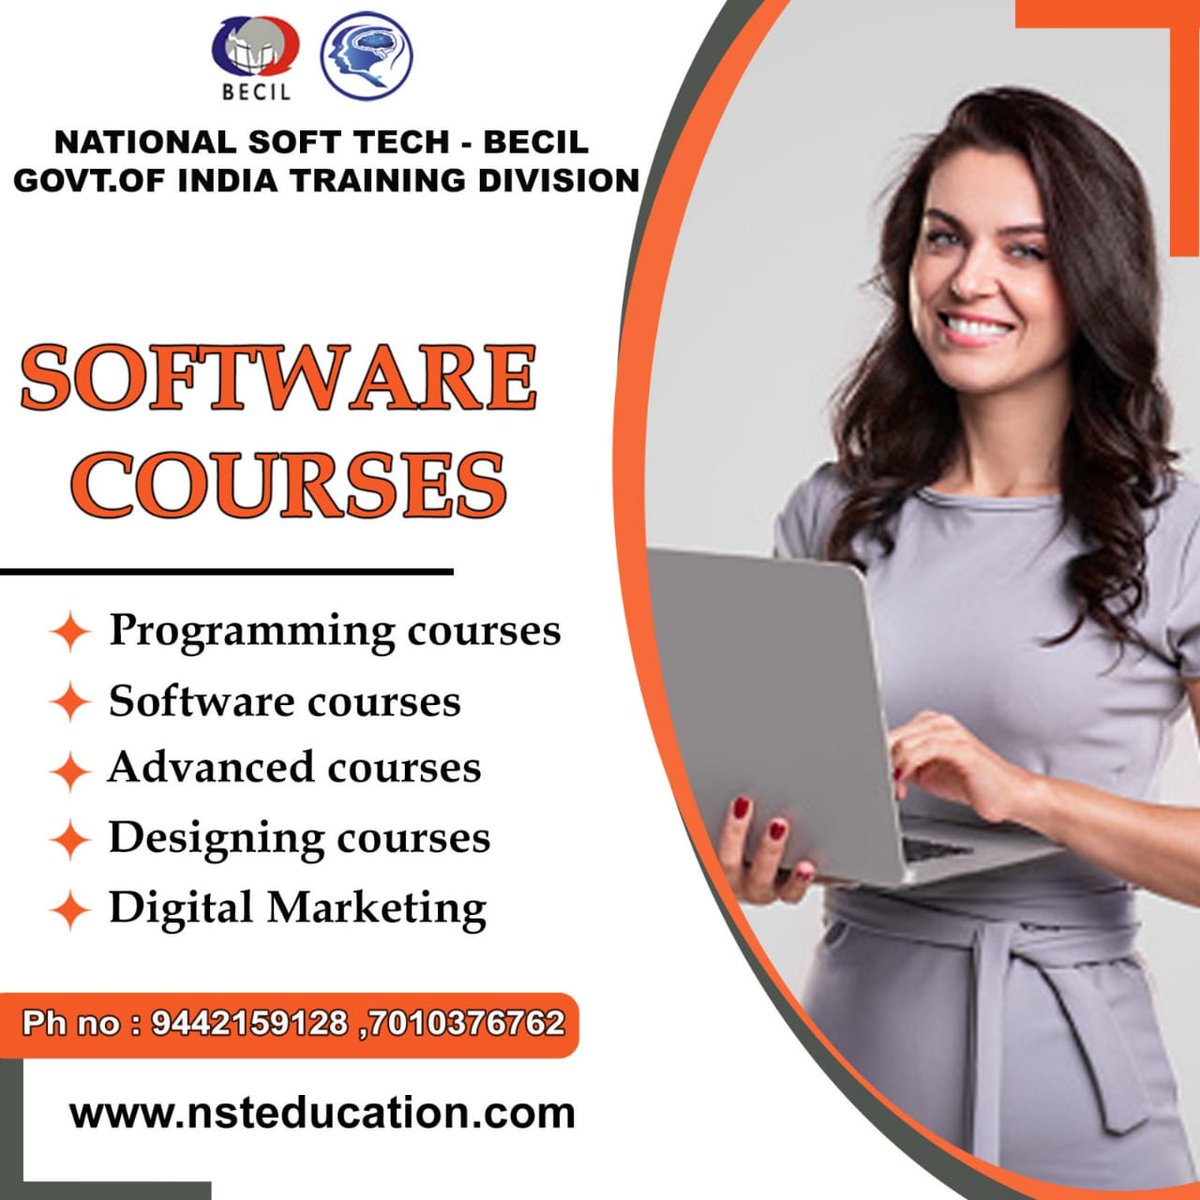 Software Courses Available!!!!
nesteducation.com
#softwaredevelopment
#certificatecourse
#programming